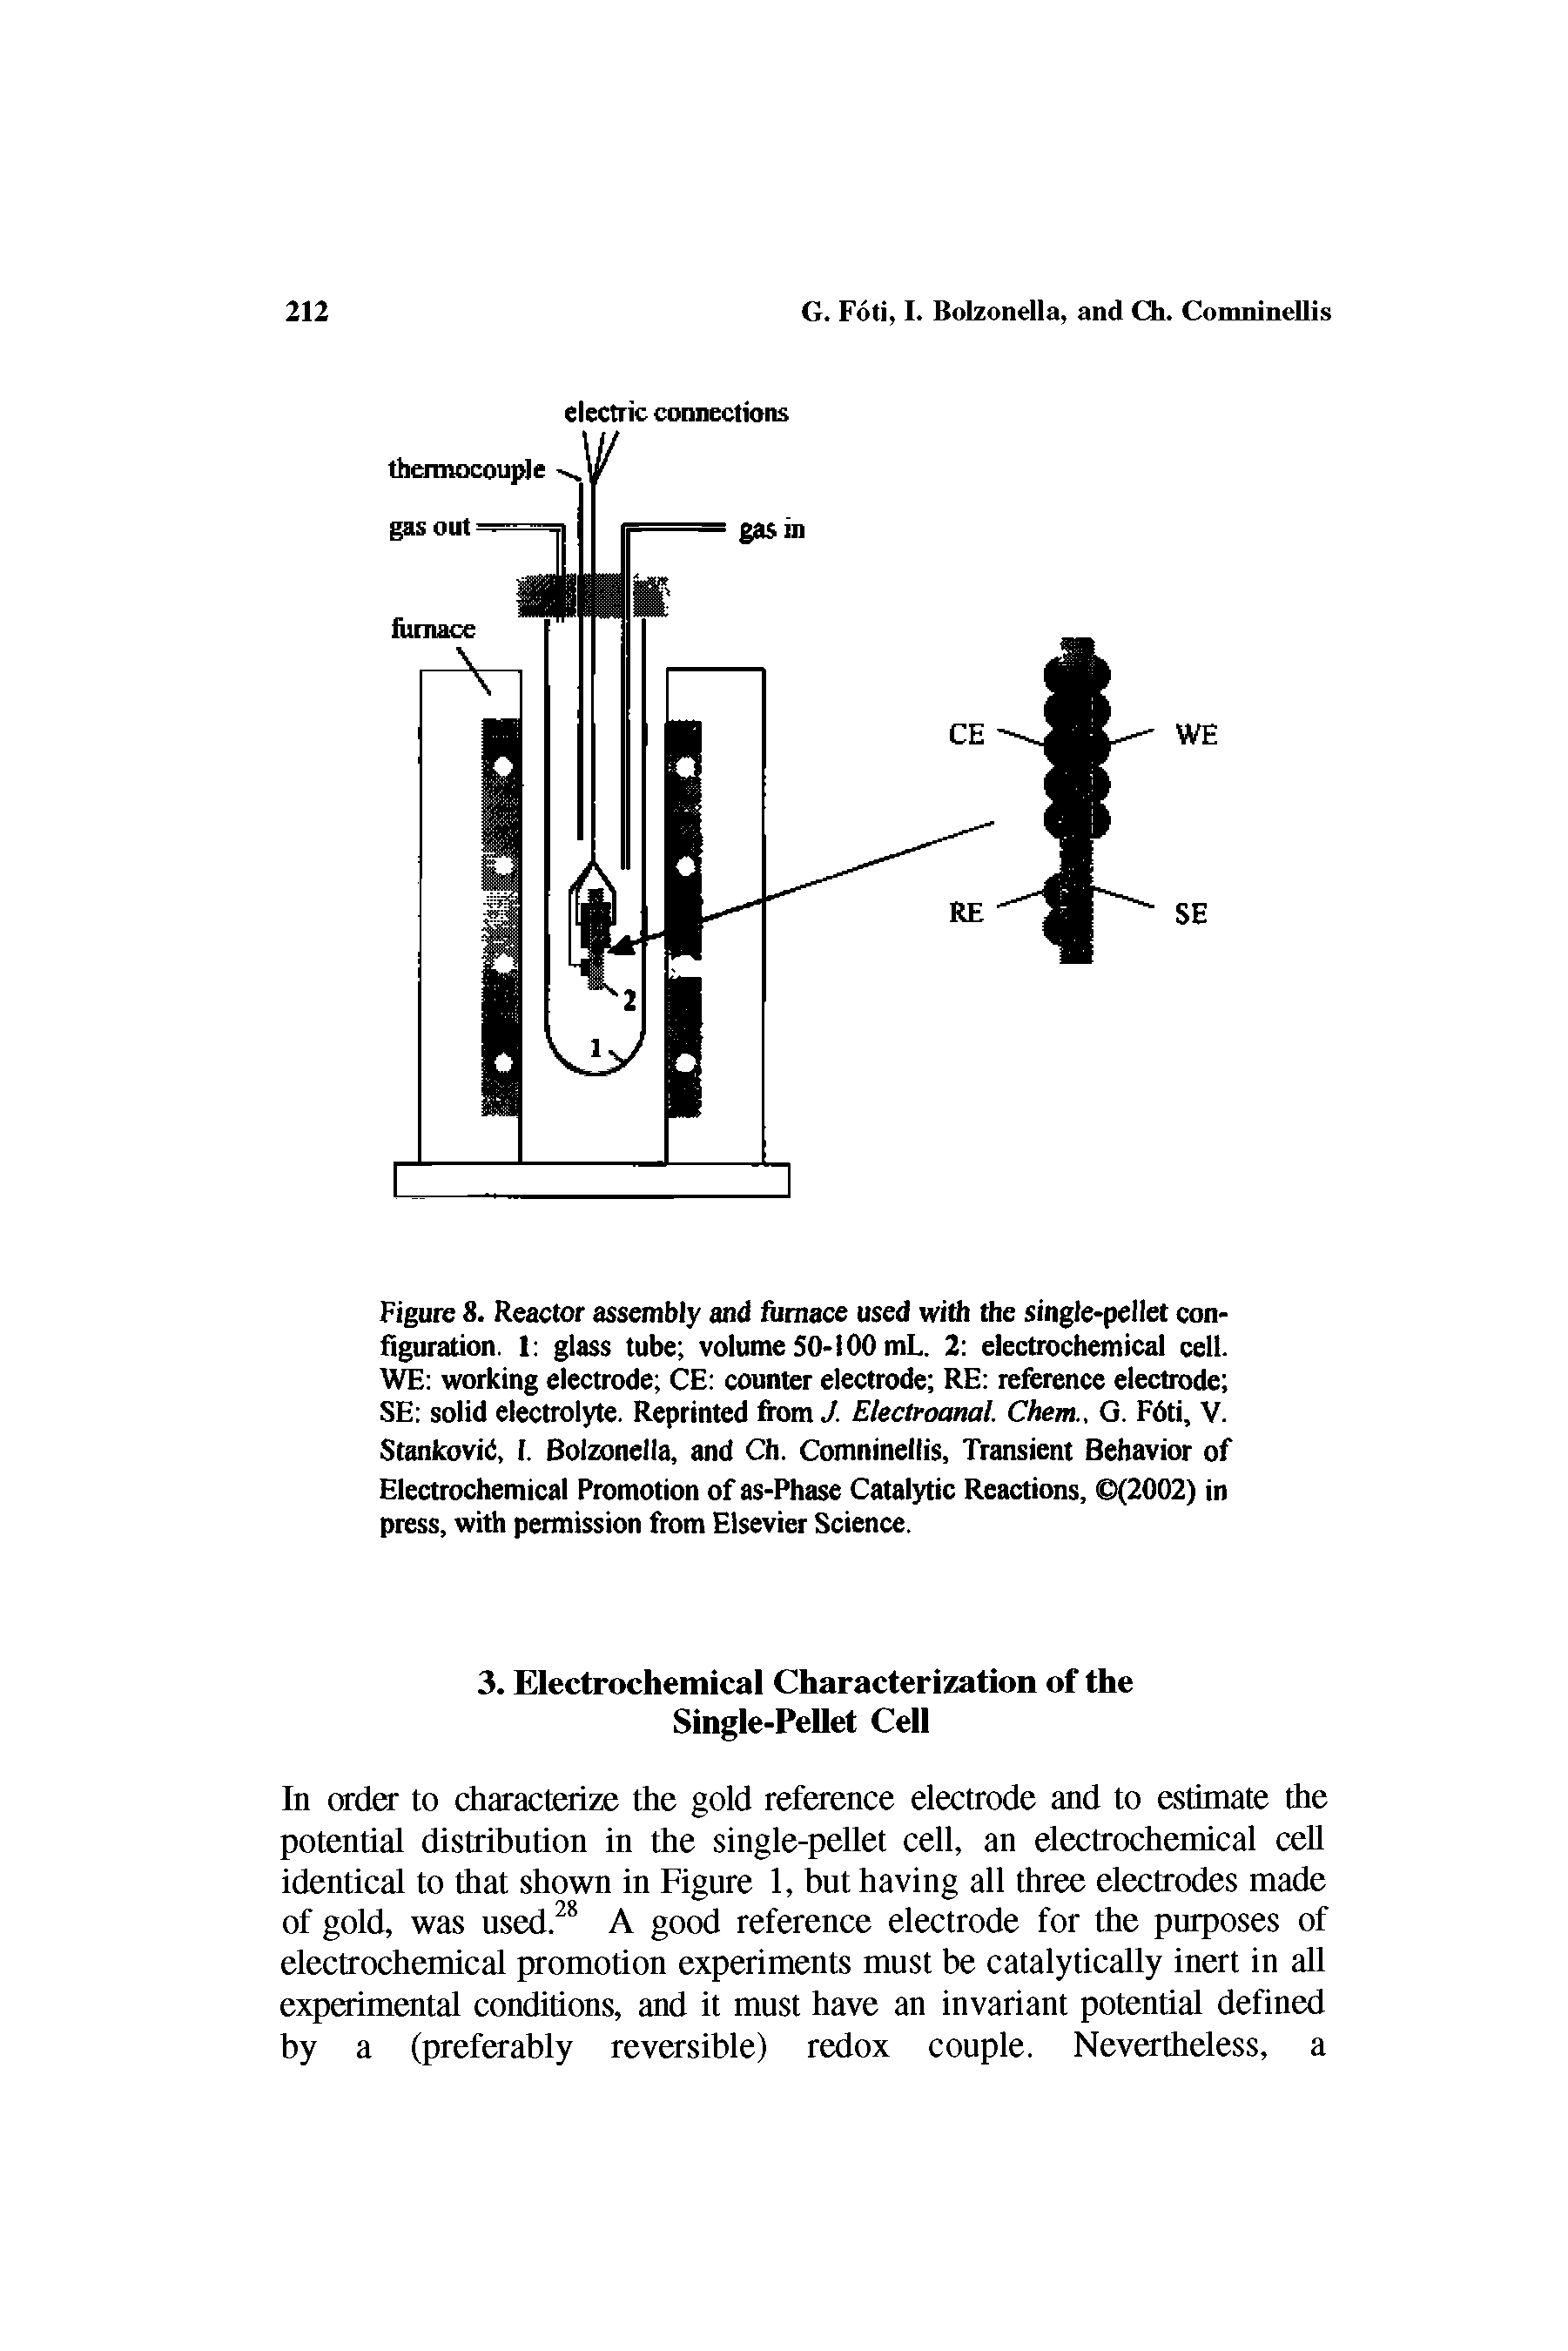 Figure 8. Reactor assembly and fiimace used with the single-pellet configuration. 1 glass tube volume SO-i 00 mL. 2 electrochemical cell. WE working electrode CE counter electrode RE reference electrode SE solid electrolyte. Reprinted from / Electroanal. Chem., G. F6ti, V. Stankovid, I. Boizonella, and Ch. Comninellis, Transient Behavior of Electrochemical Promotion of as-Phase Catalytic Reactions, (2002) in press, with permission from Elsevier Science.